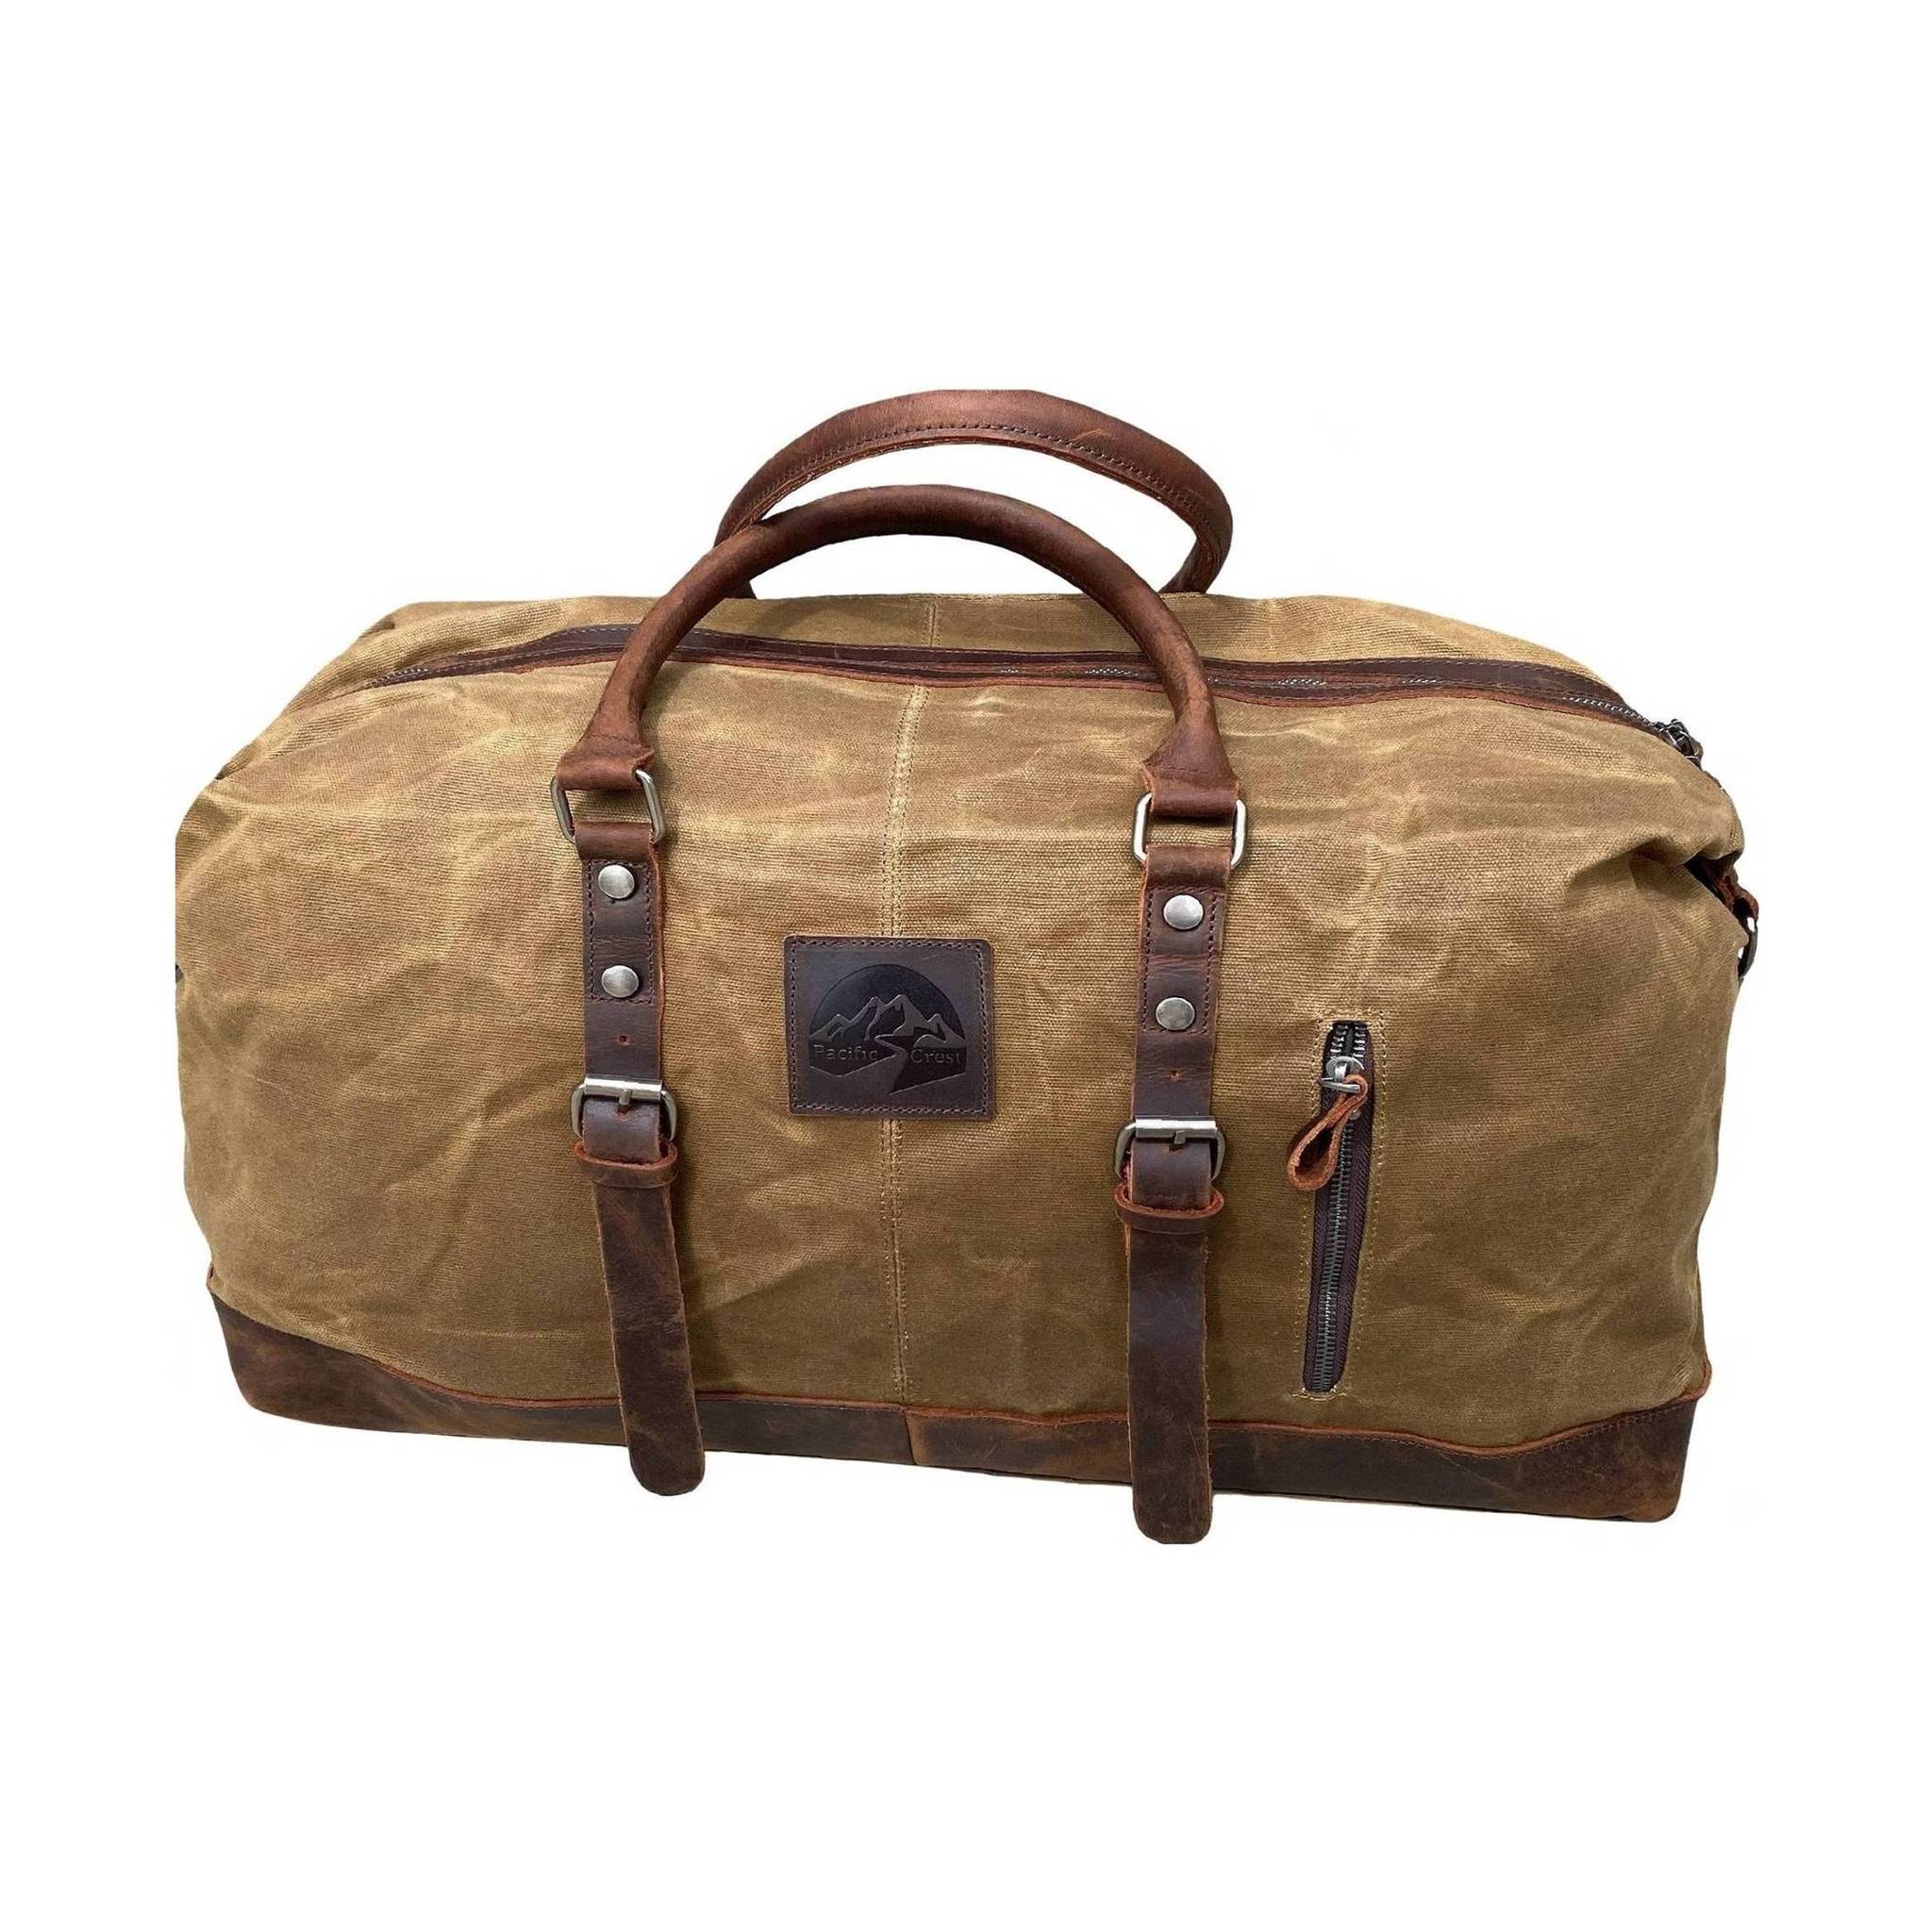 Pacific Crest Duffle Bag - Leather Brown